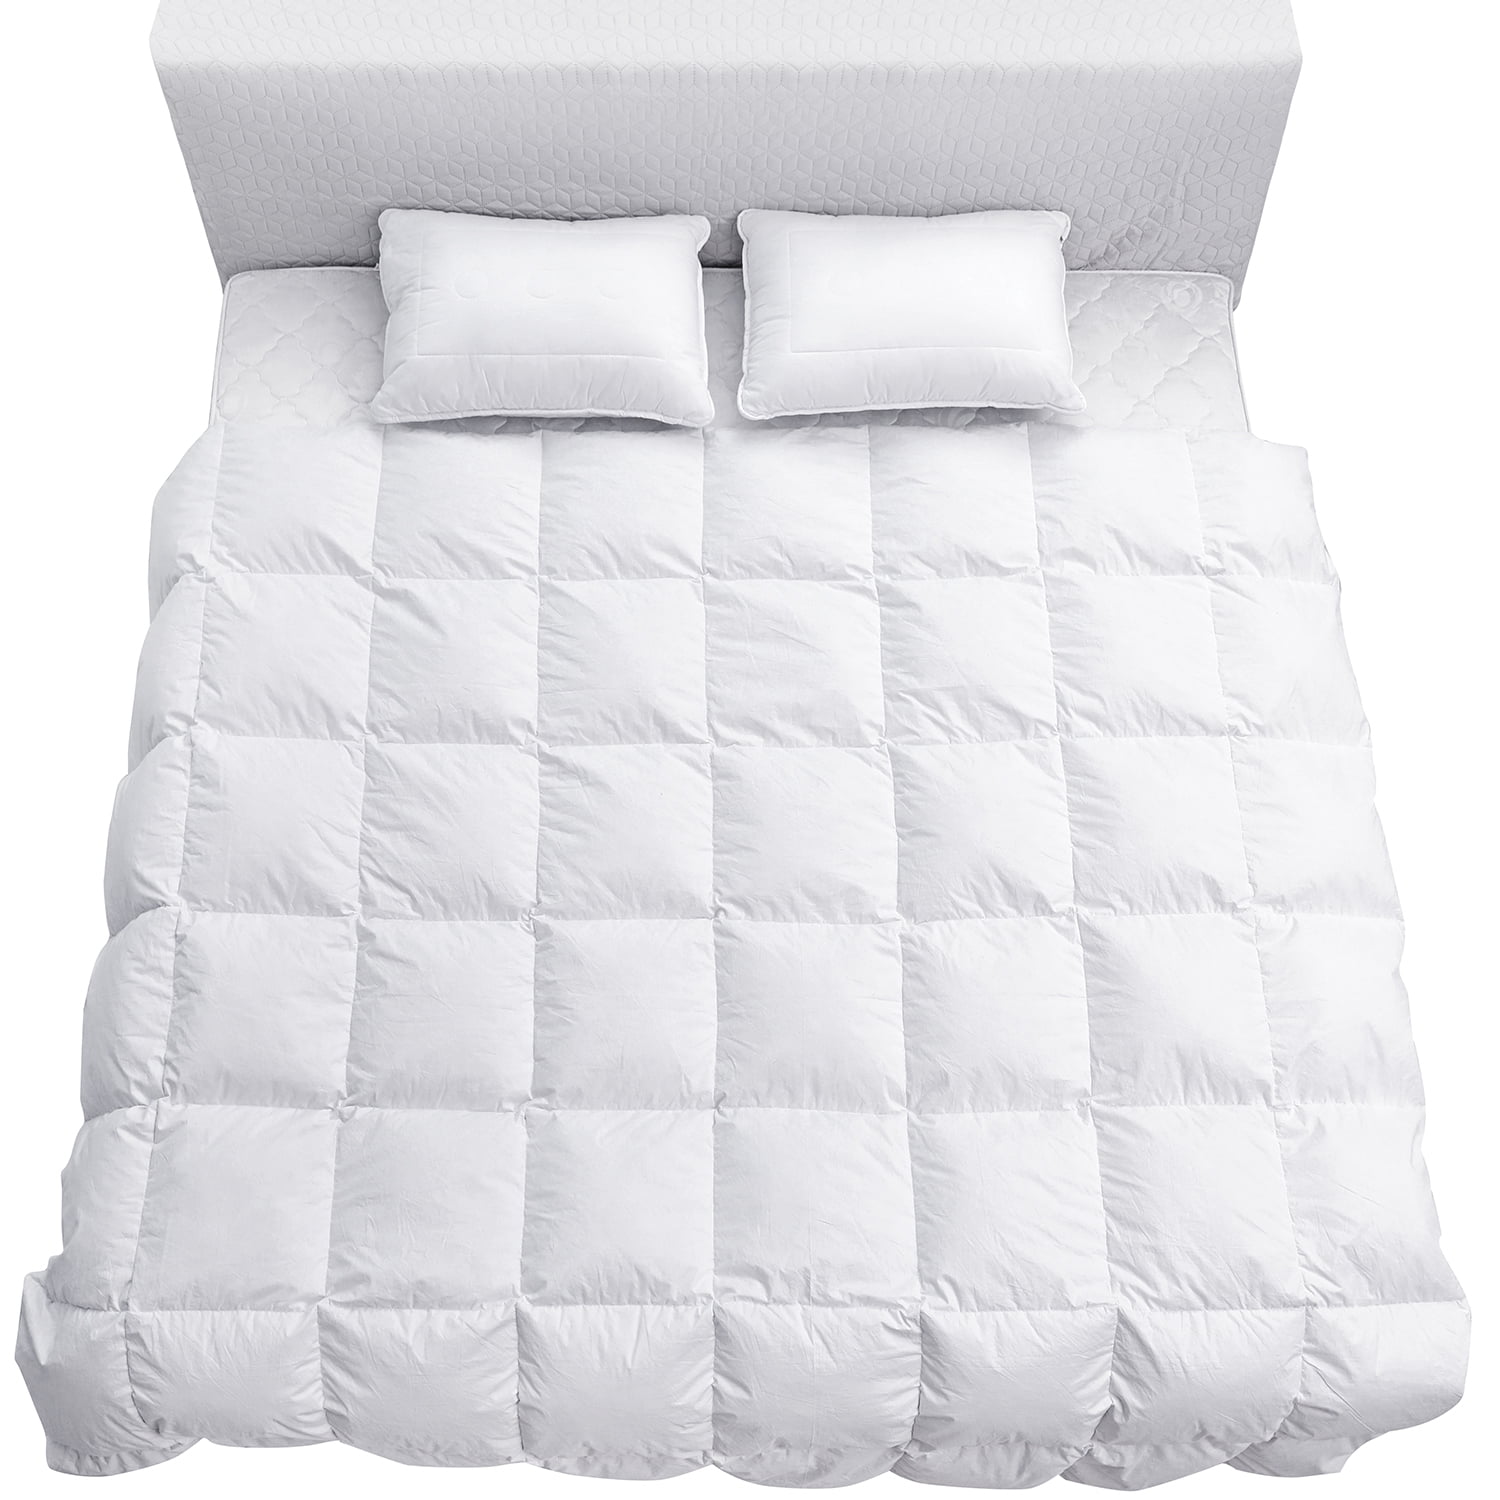 Box Stitched Microfiber Fill Eterish Comforters for Queen Bed Lightweight White Comforter Queen Duvet Insert with Corner Tabs Quilted Down Alternative Comforter Queen All Season 